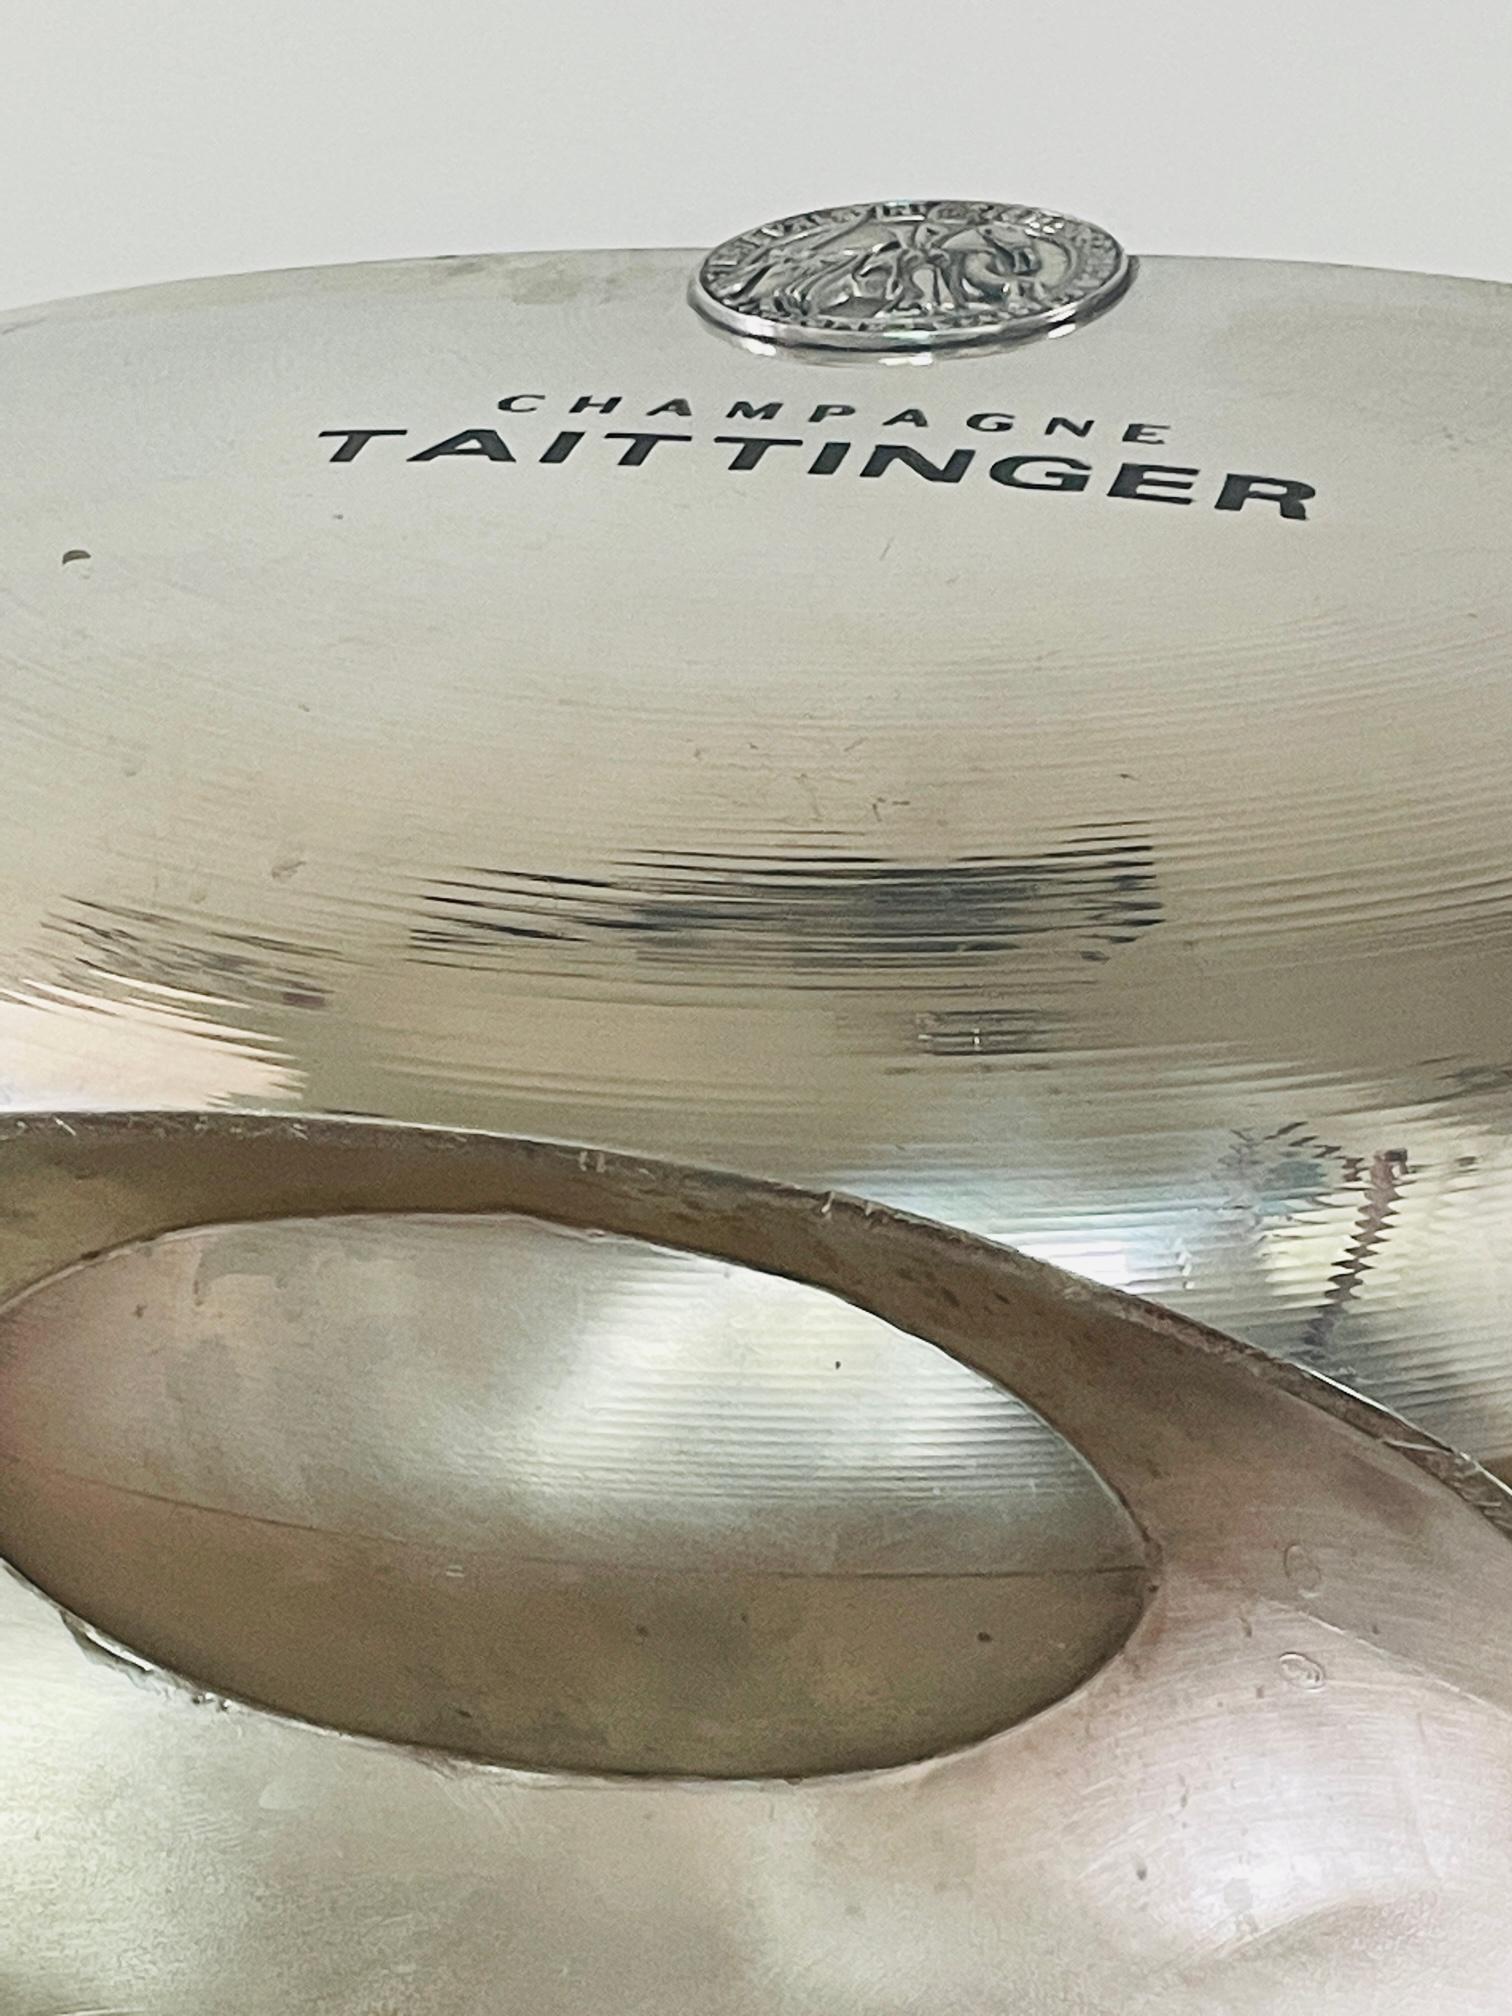 Taittinger half-moon Champagne bowl. Beautiful pewter champagne cooler by Etain 5